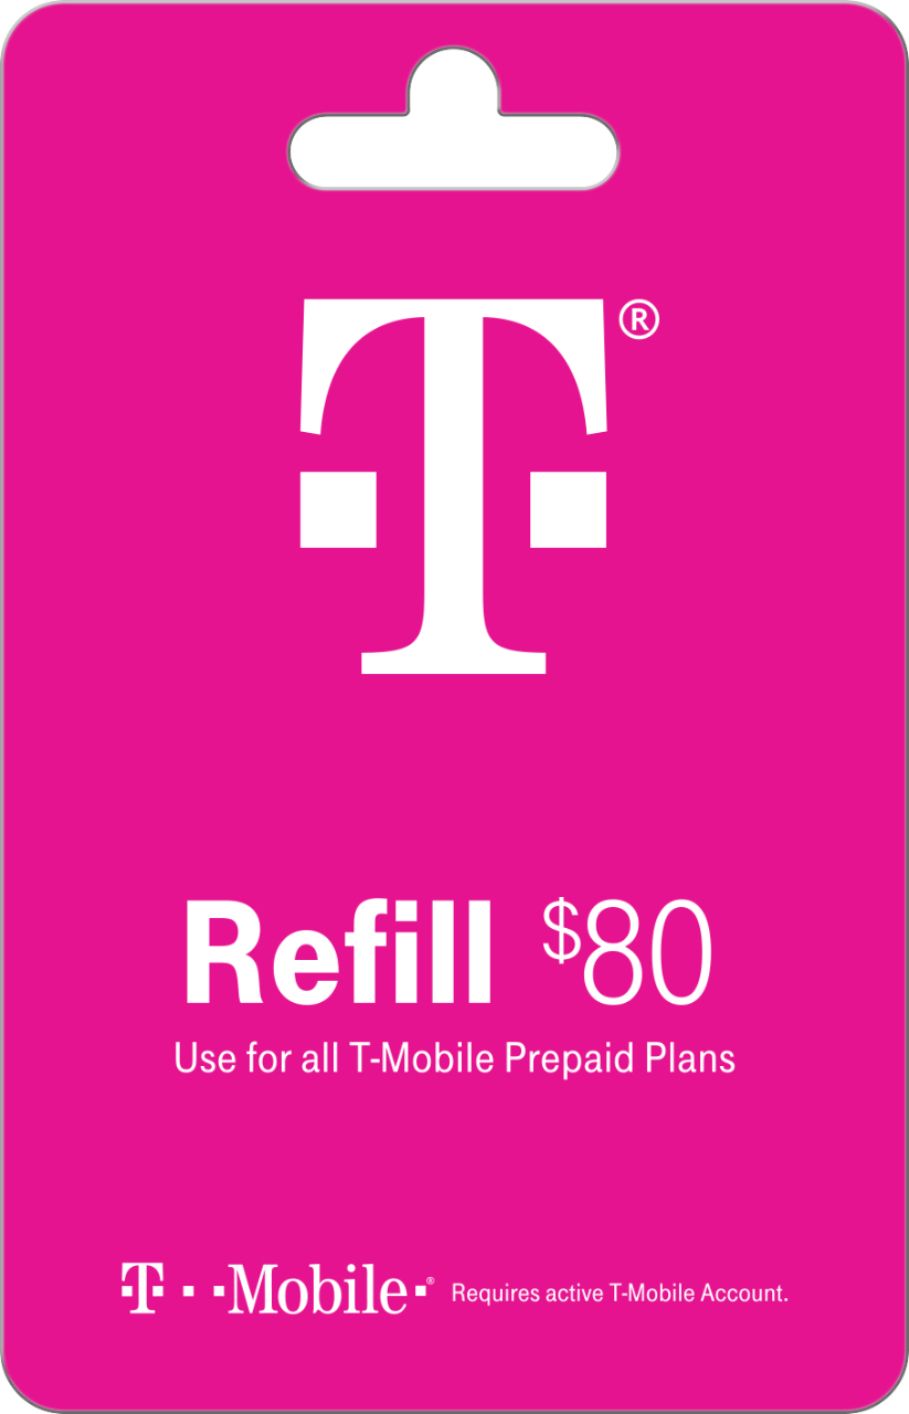 T-Mobile - $80 Refill Code (Immediate Delivery) [Digital]